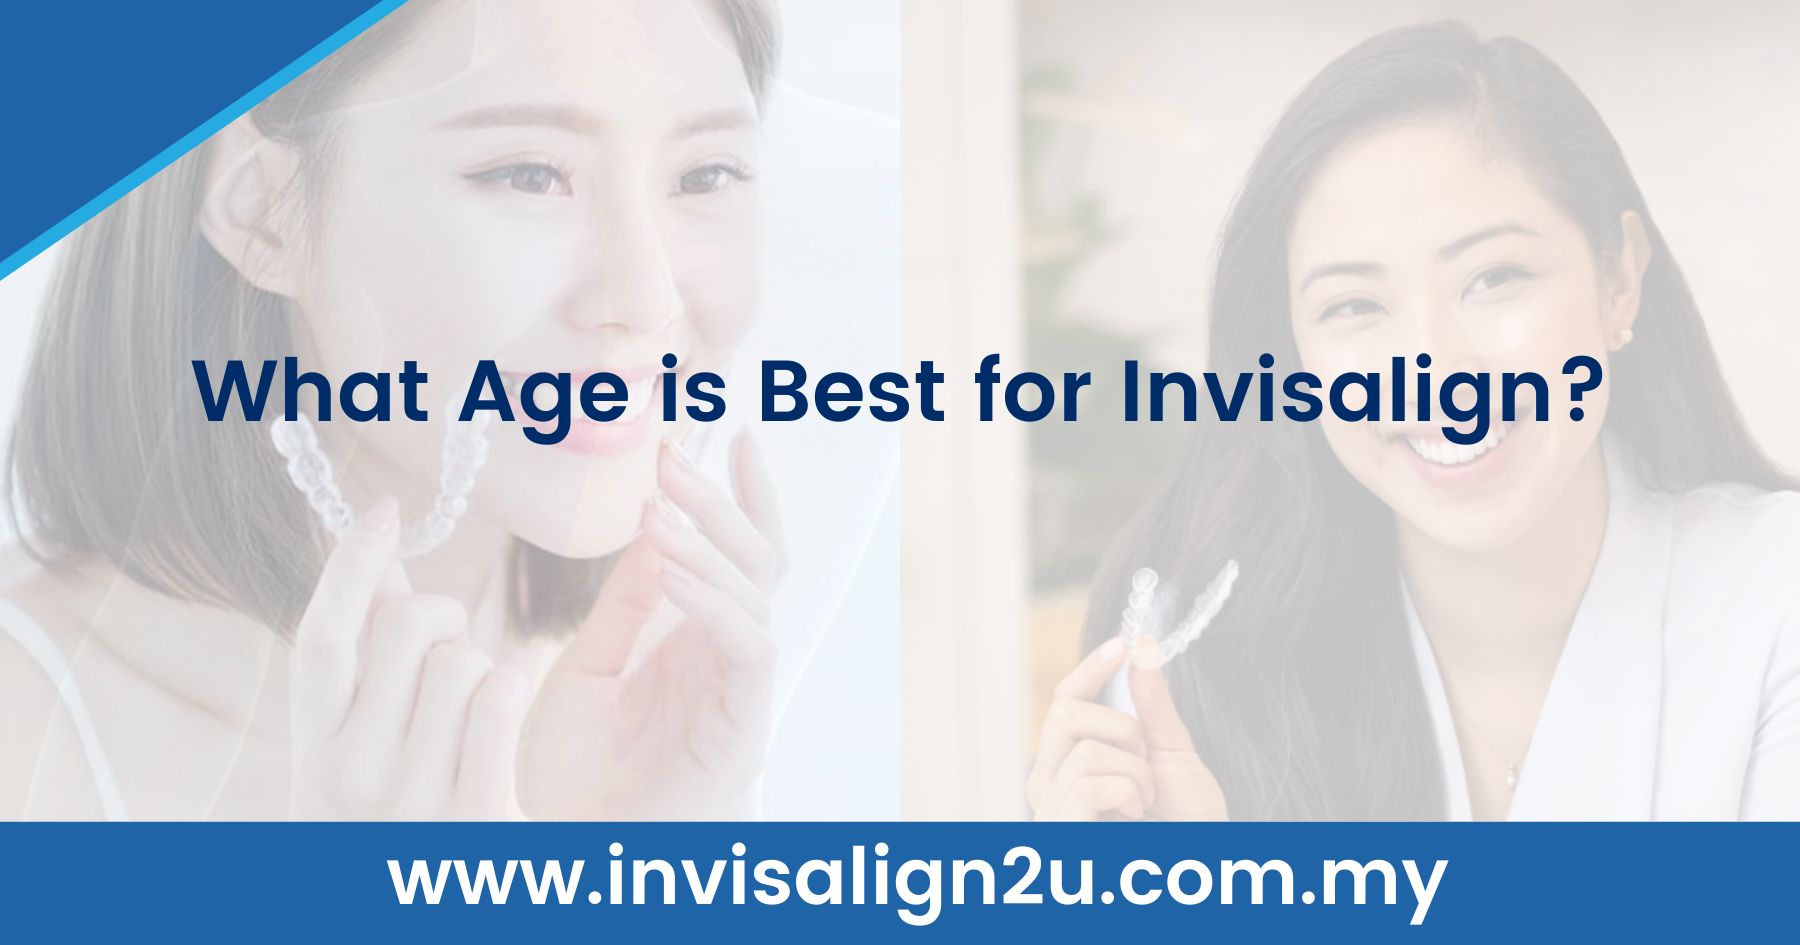 What Age is Best for Invisalign